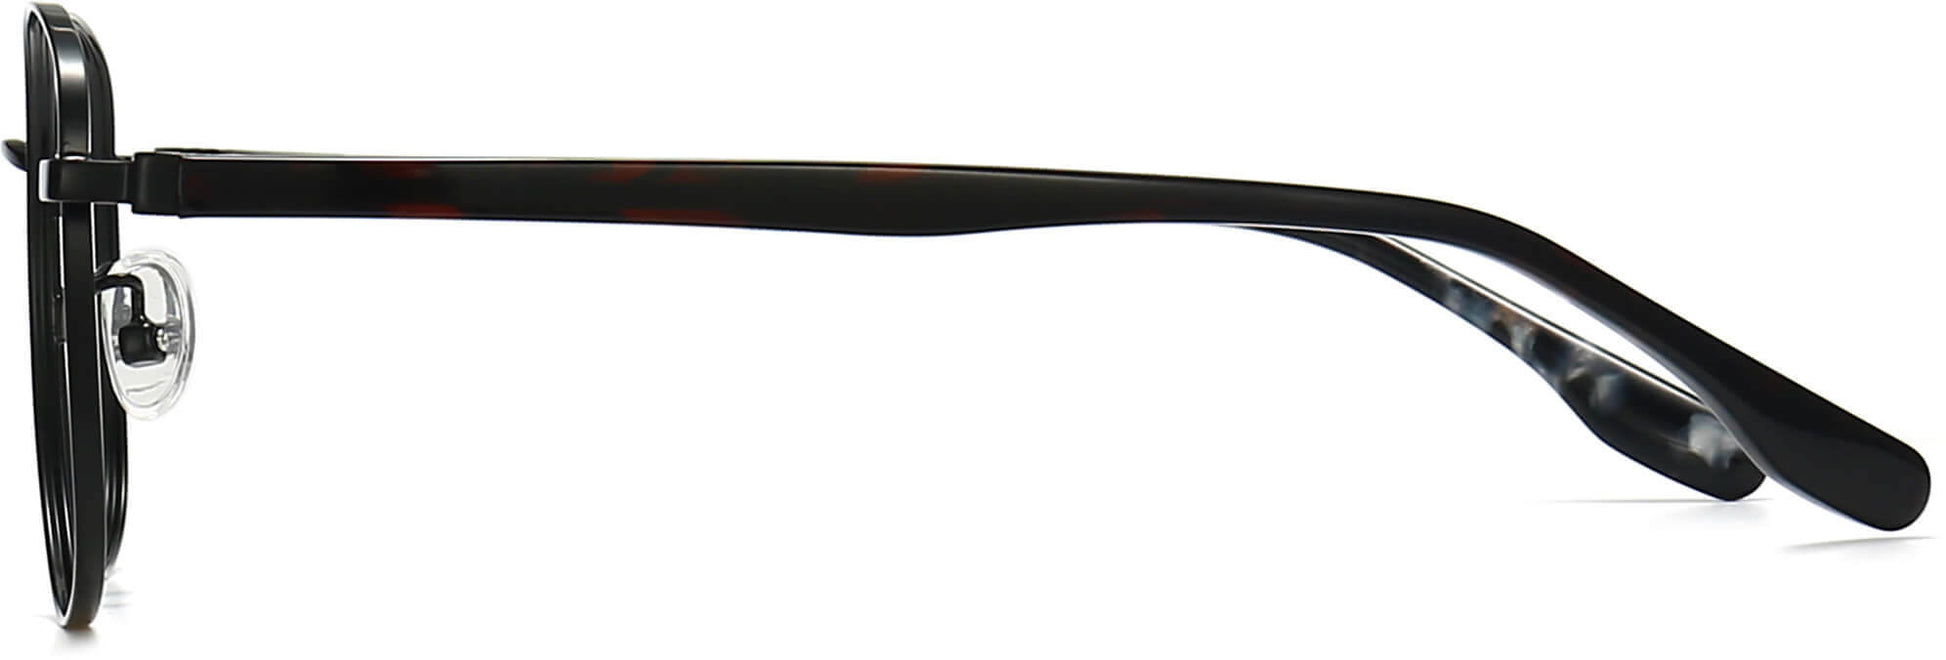 Rocco Square Black Eyeglasses from ANRRI, side view